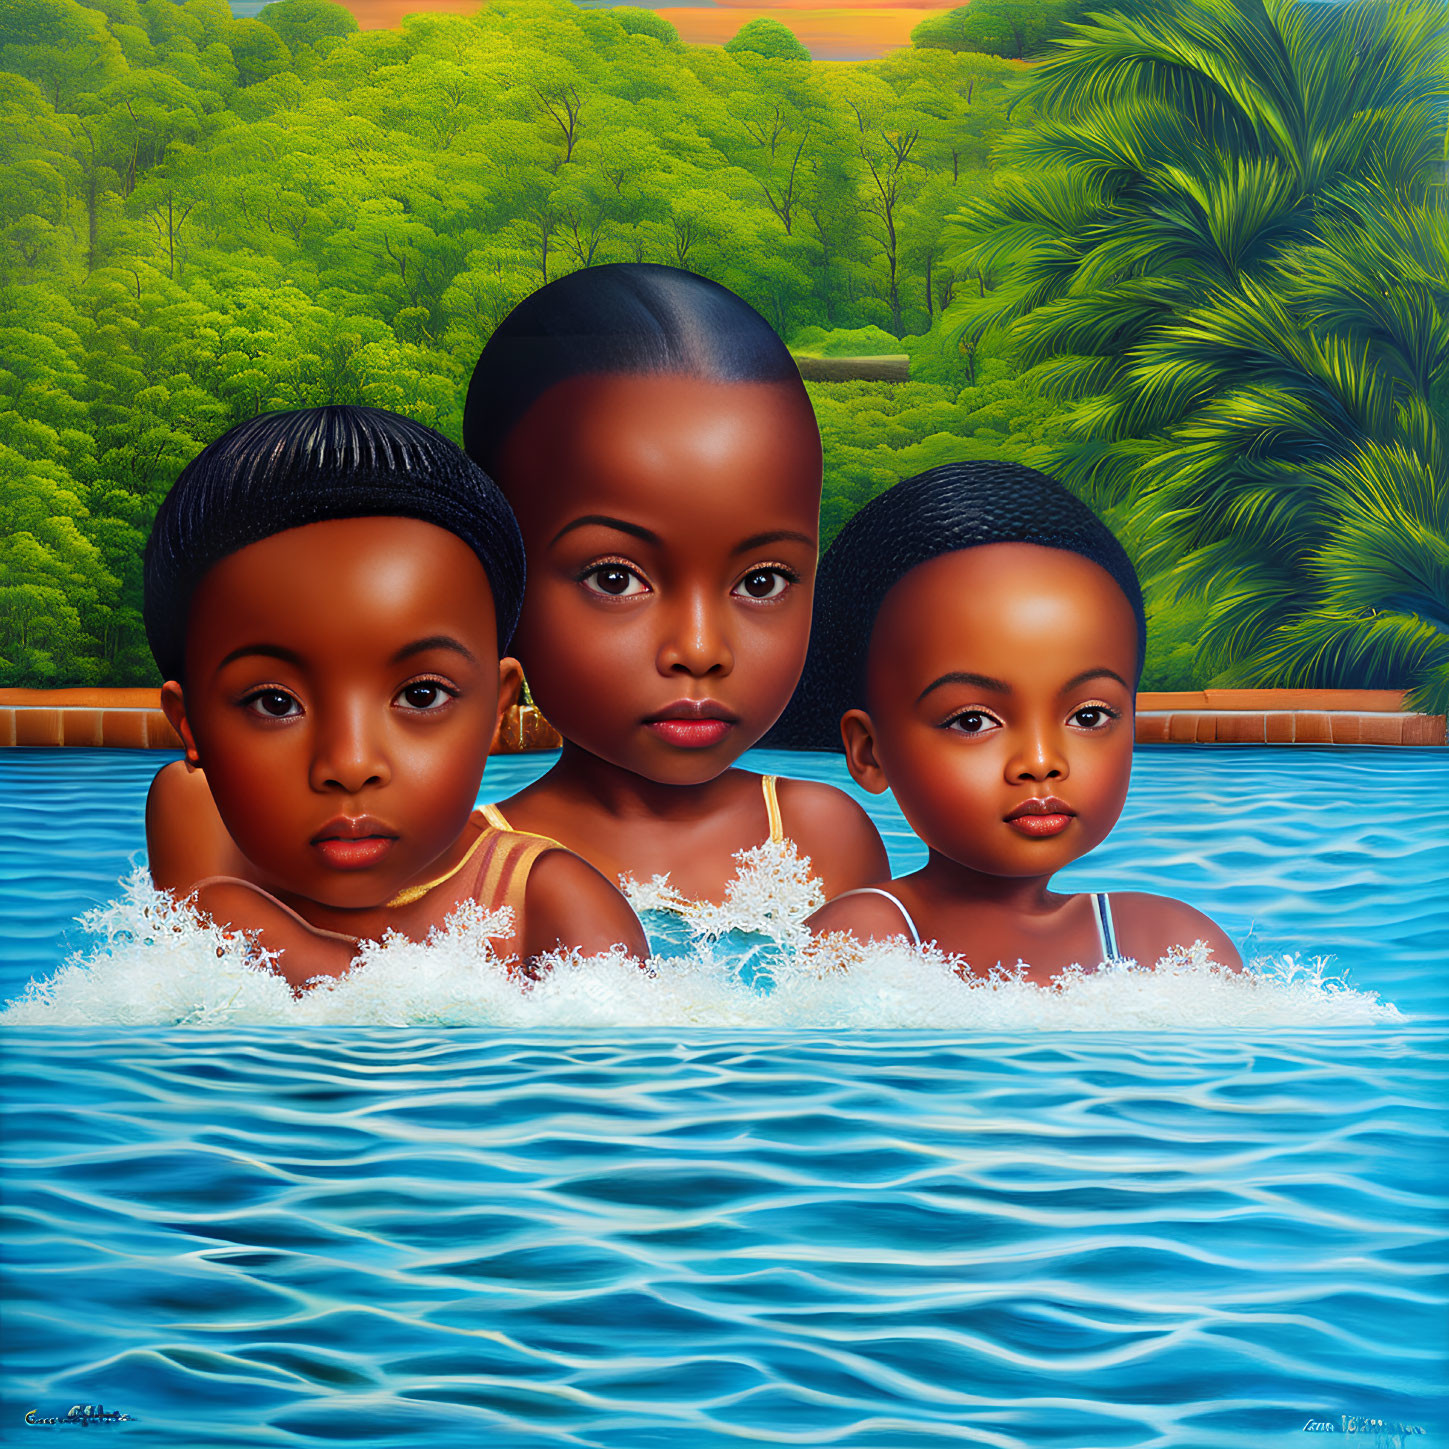 Three children swimming in a pool with lush green foliage